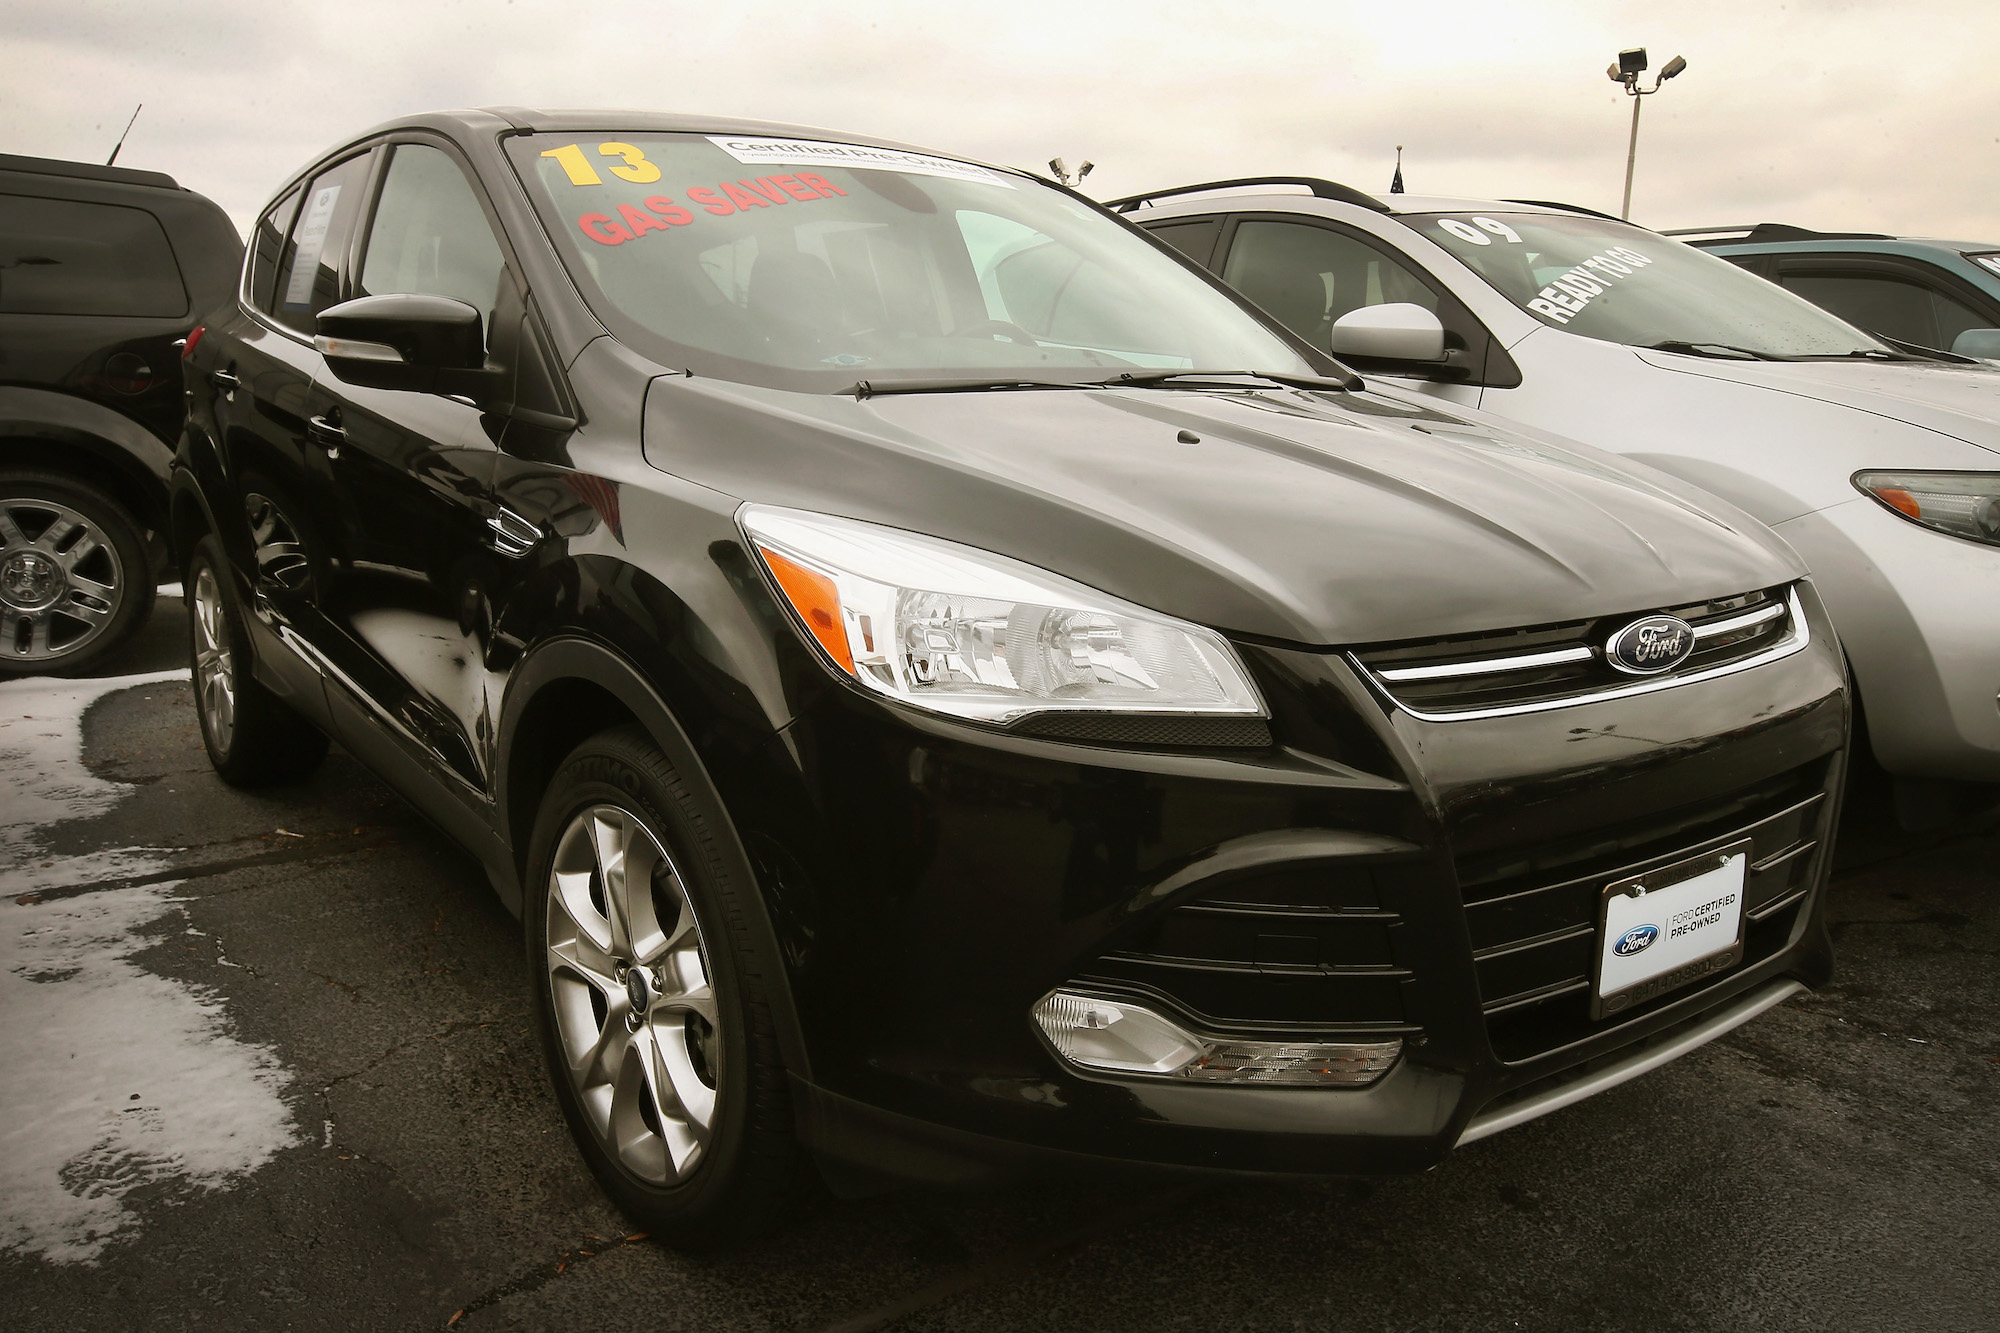 A black 2013 Ford Escape compact SUV sits at a dealership on November 26, 2013, in Niles, Illinois